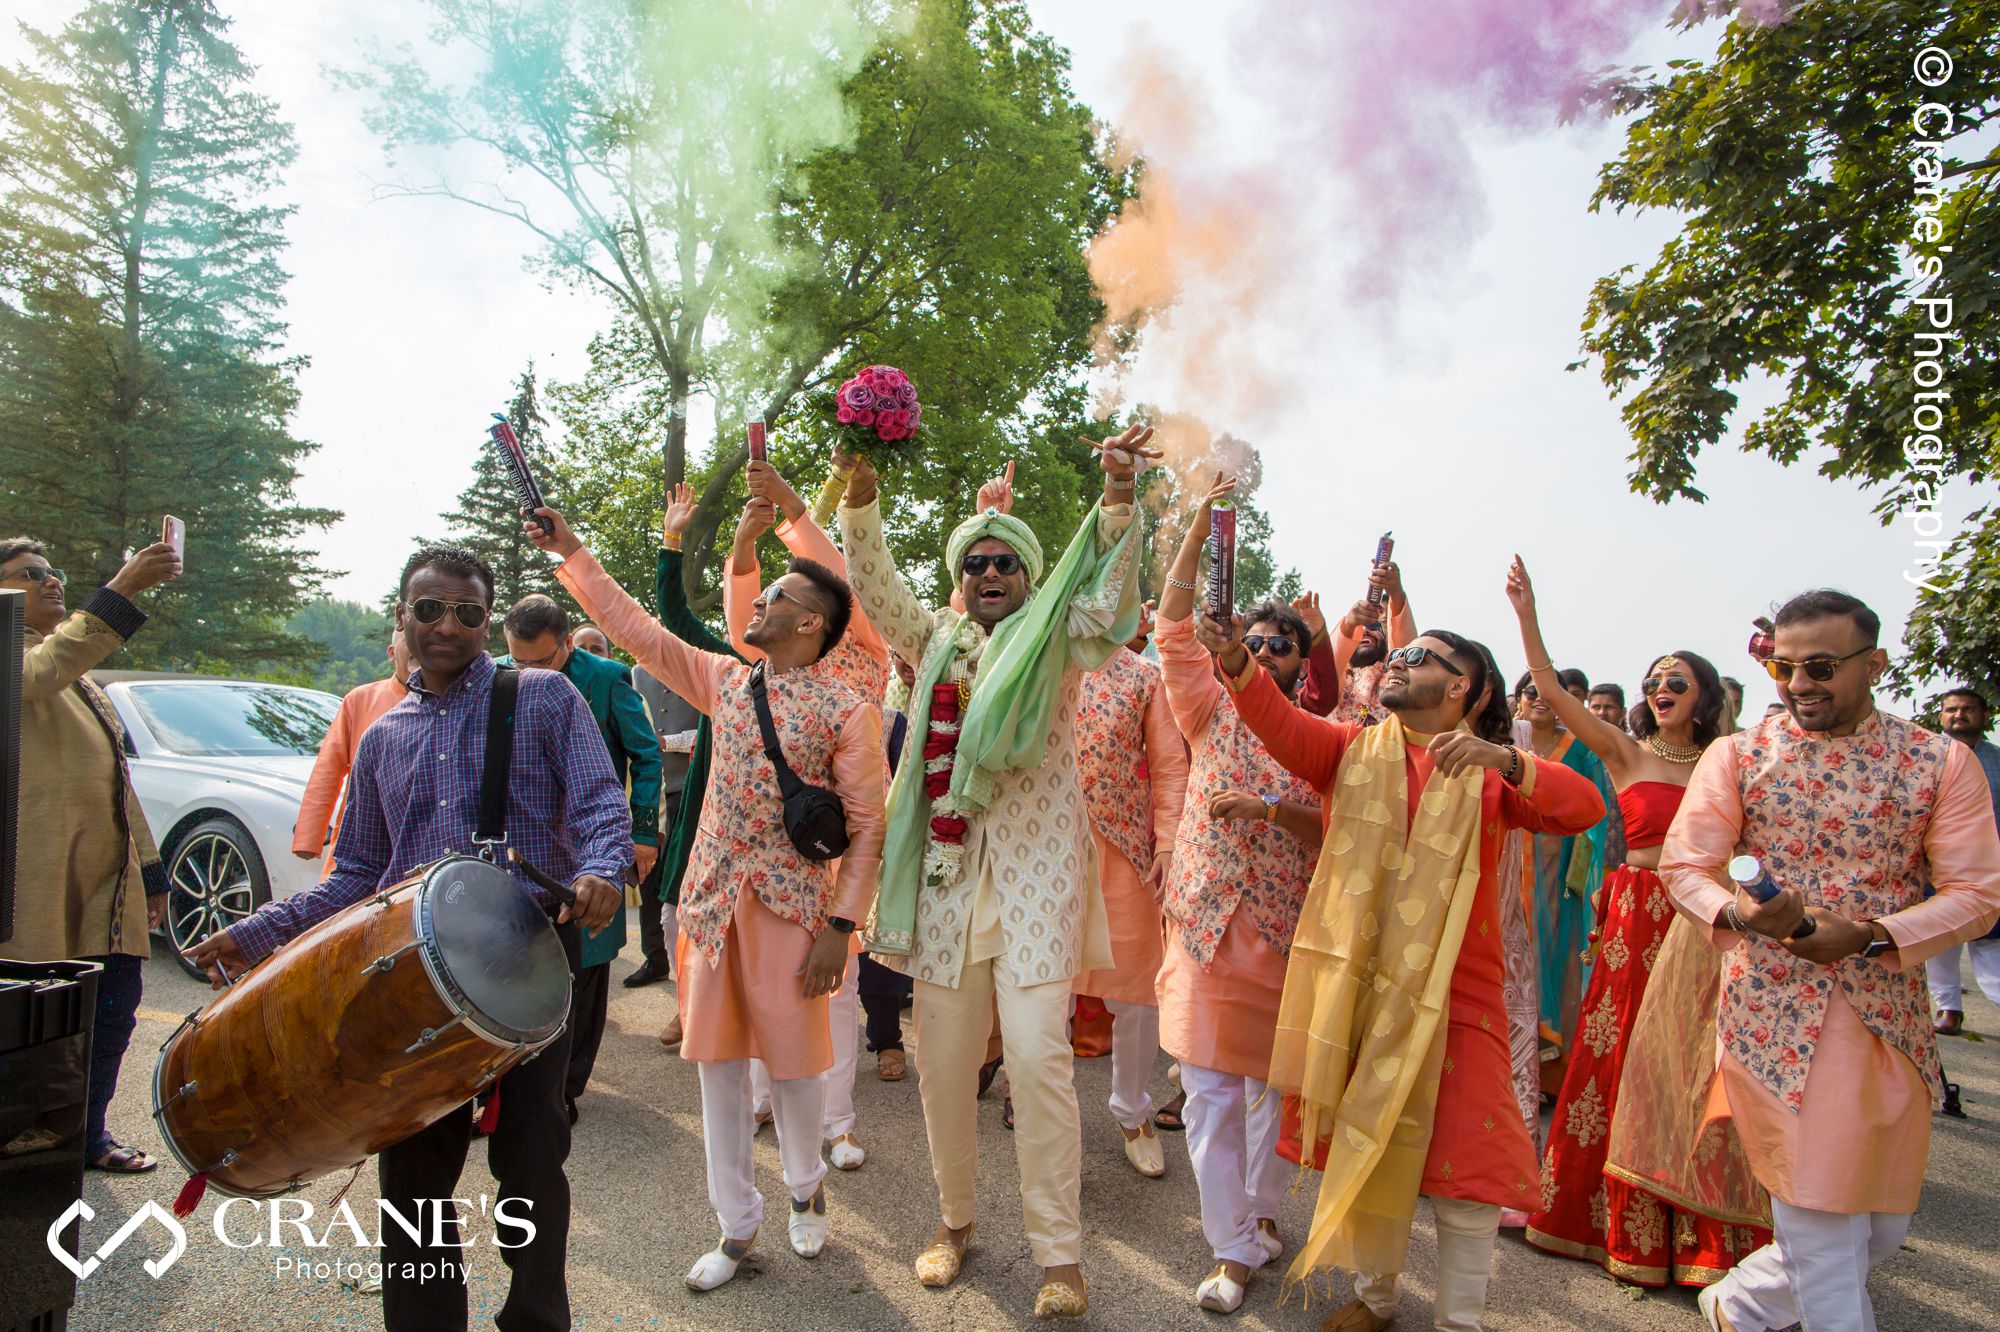 Indian groomsmen fire smoke bombs during a baraat before an outdoor wedding in Chicago